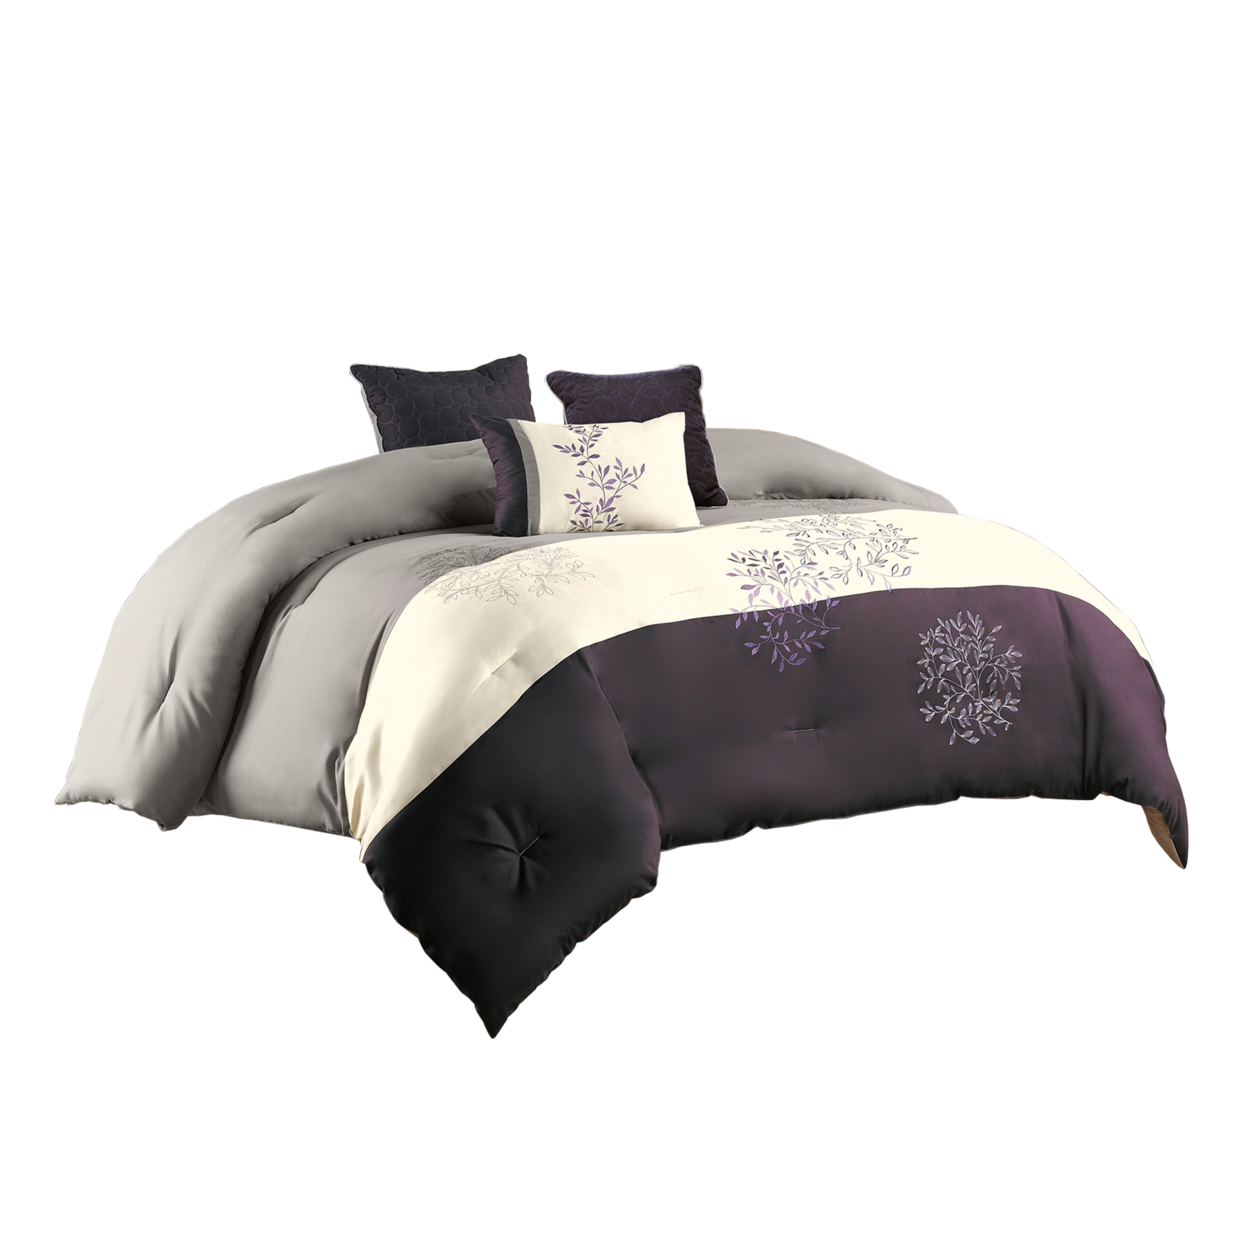 7 Piece King Polyester Comforter Set With Leaf Embroidery, Gray And Purple- Saltoro Sherpi